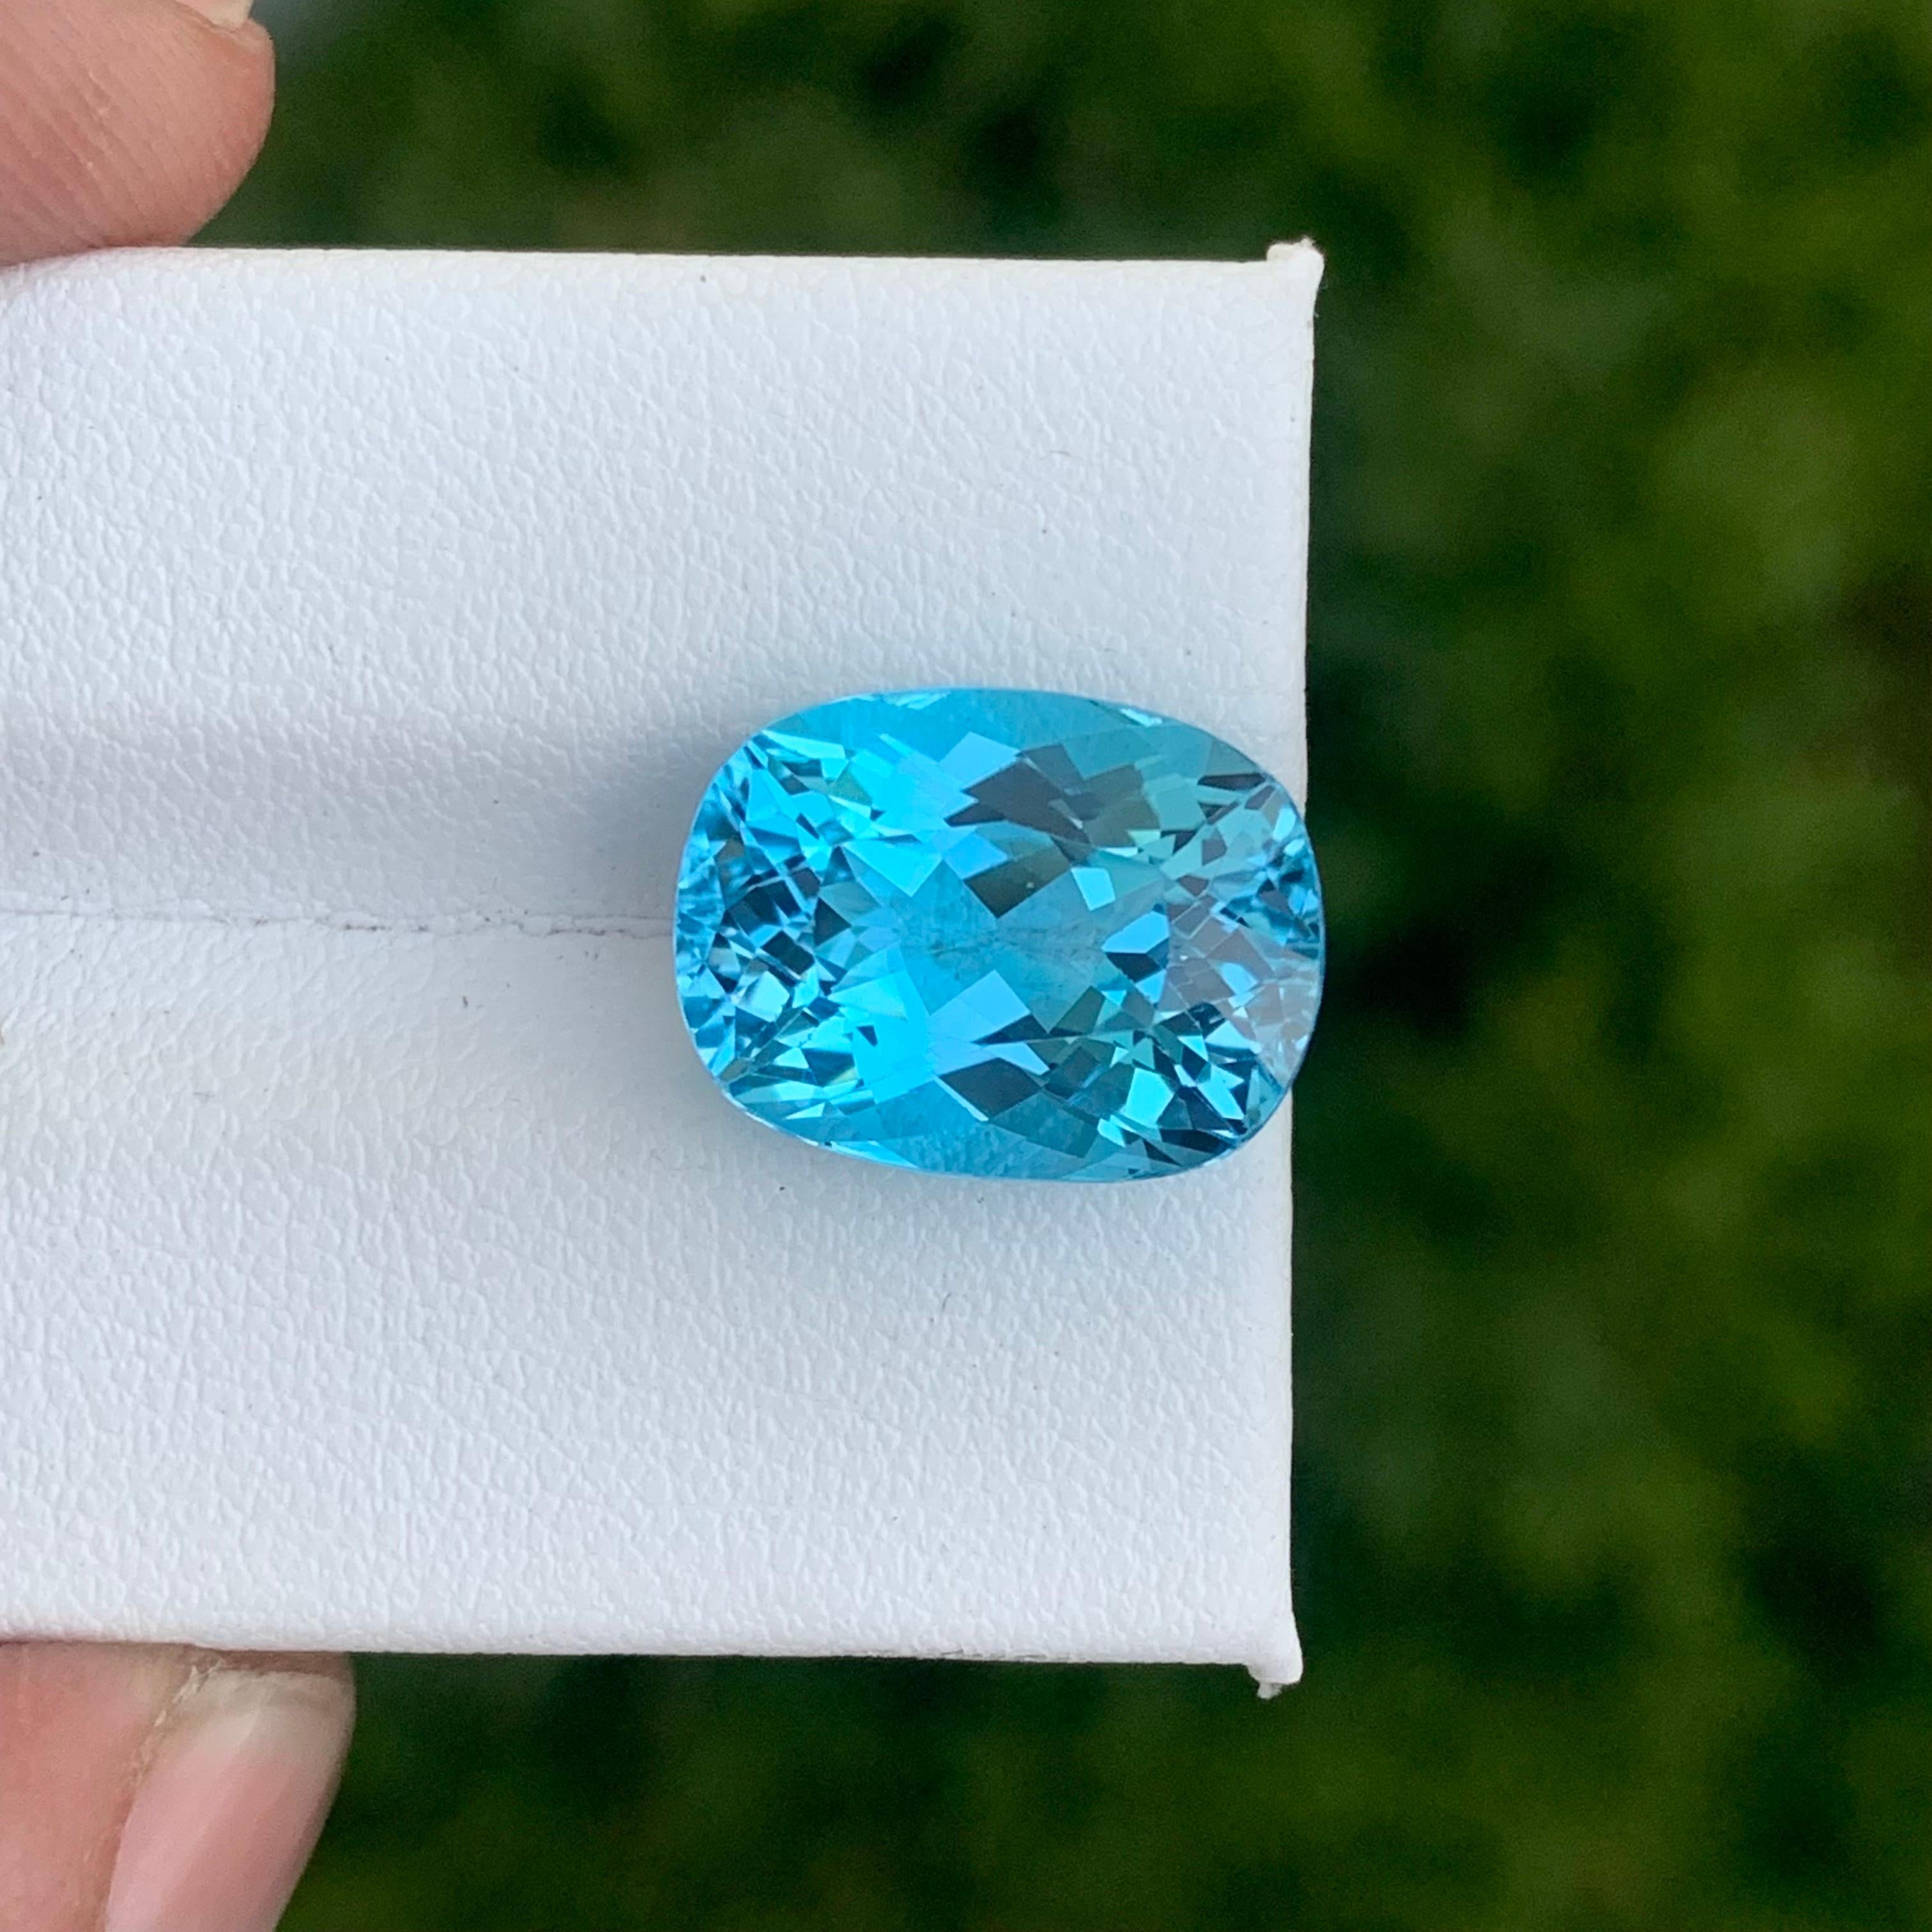 12.20 Cts Loose Sky Blue Topaz Gemstone from Brazil For Sale 1